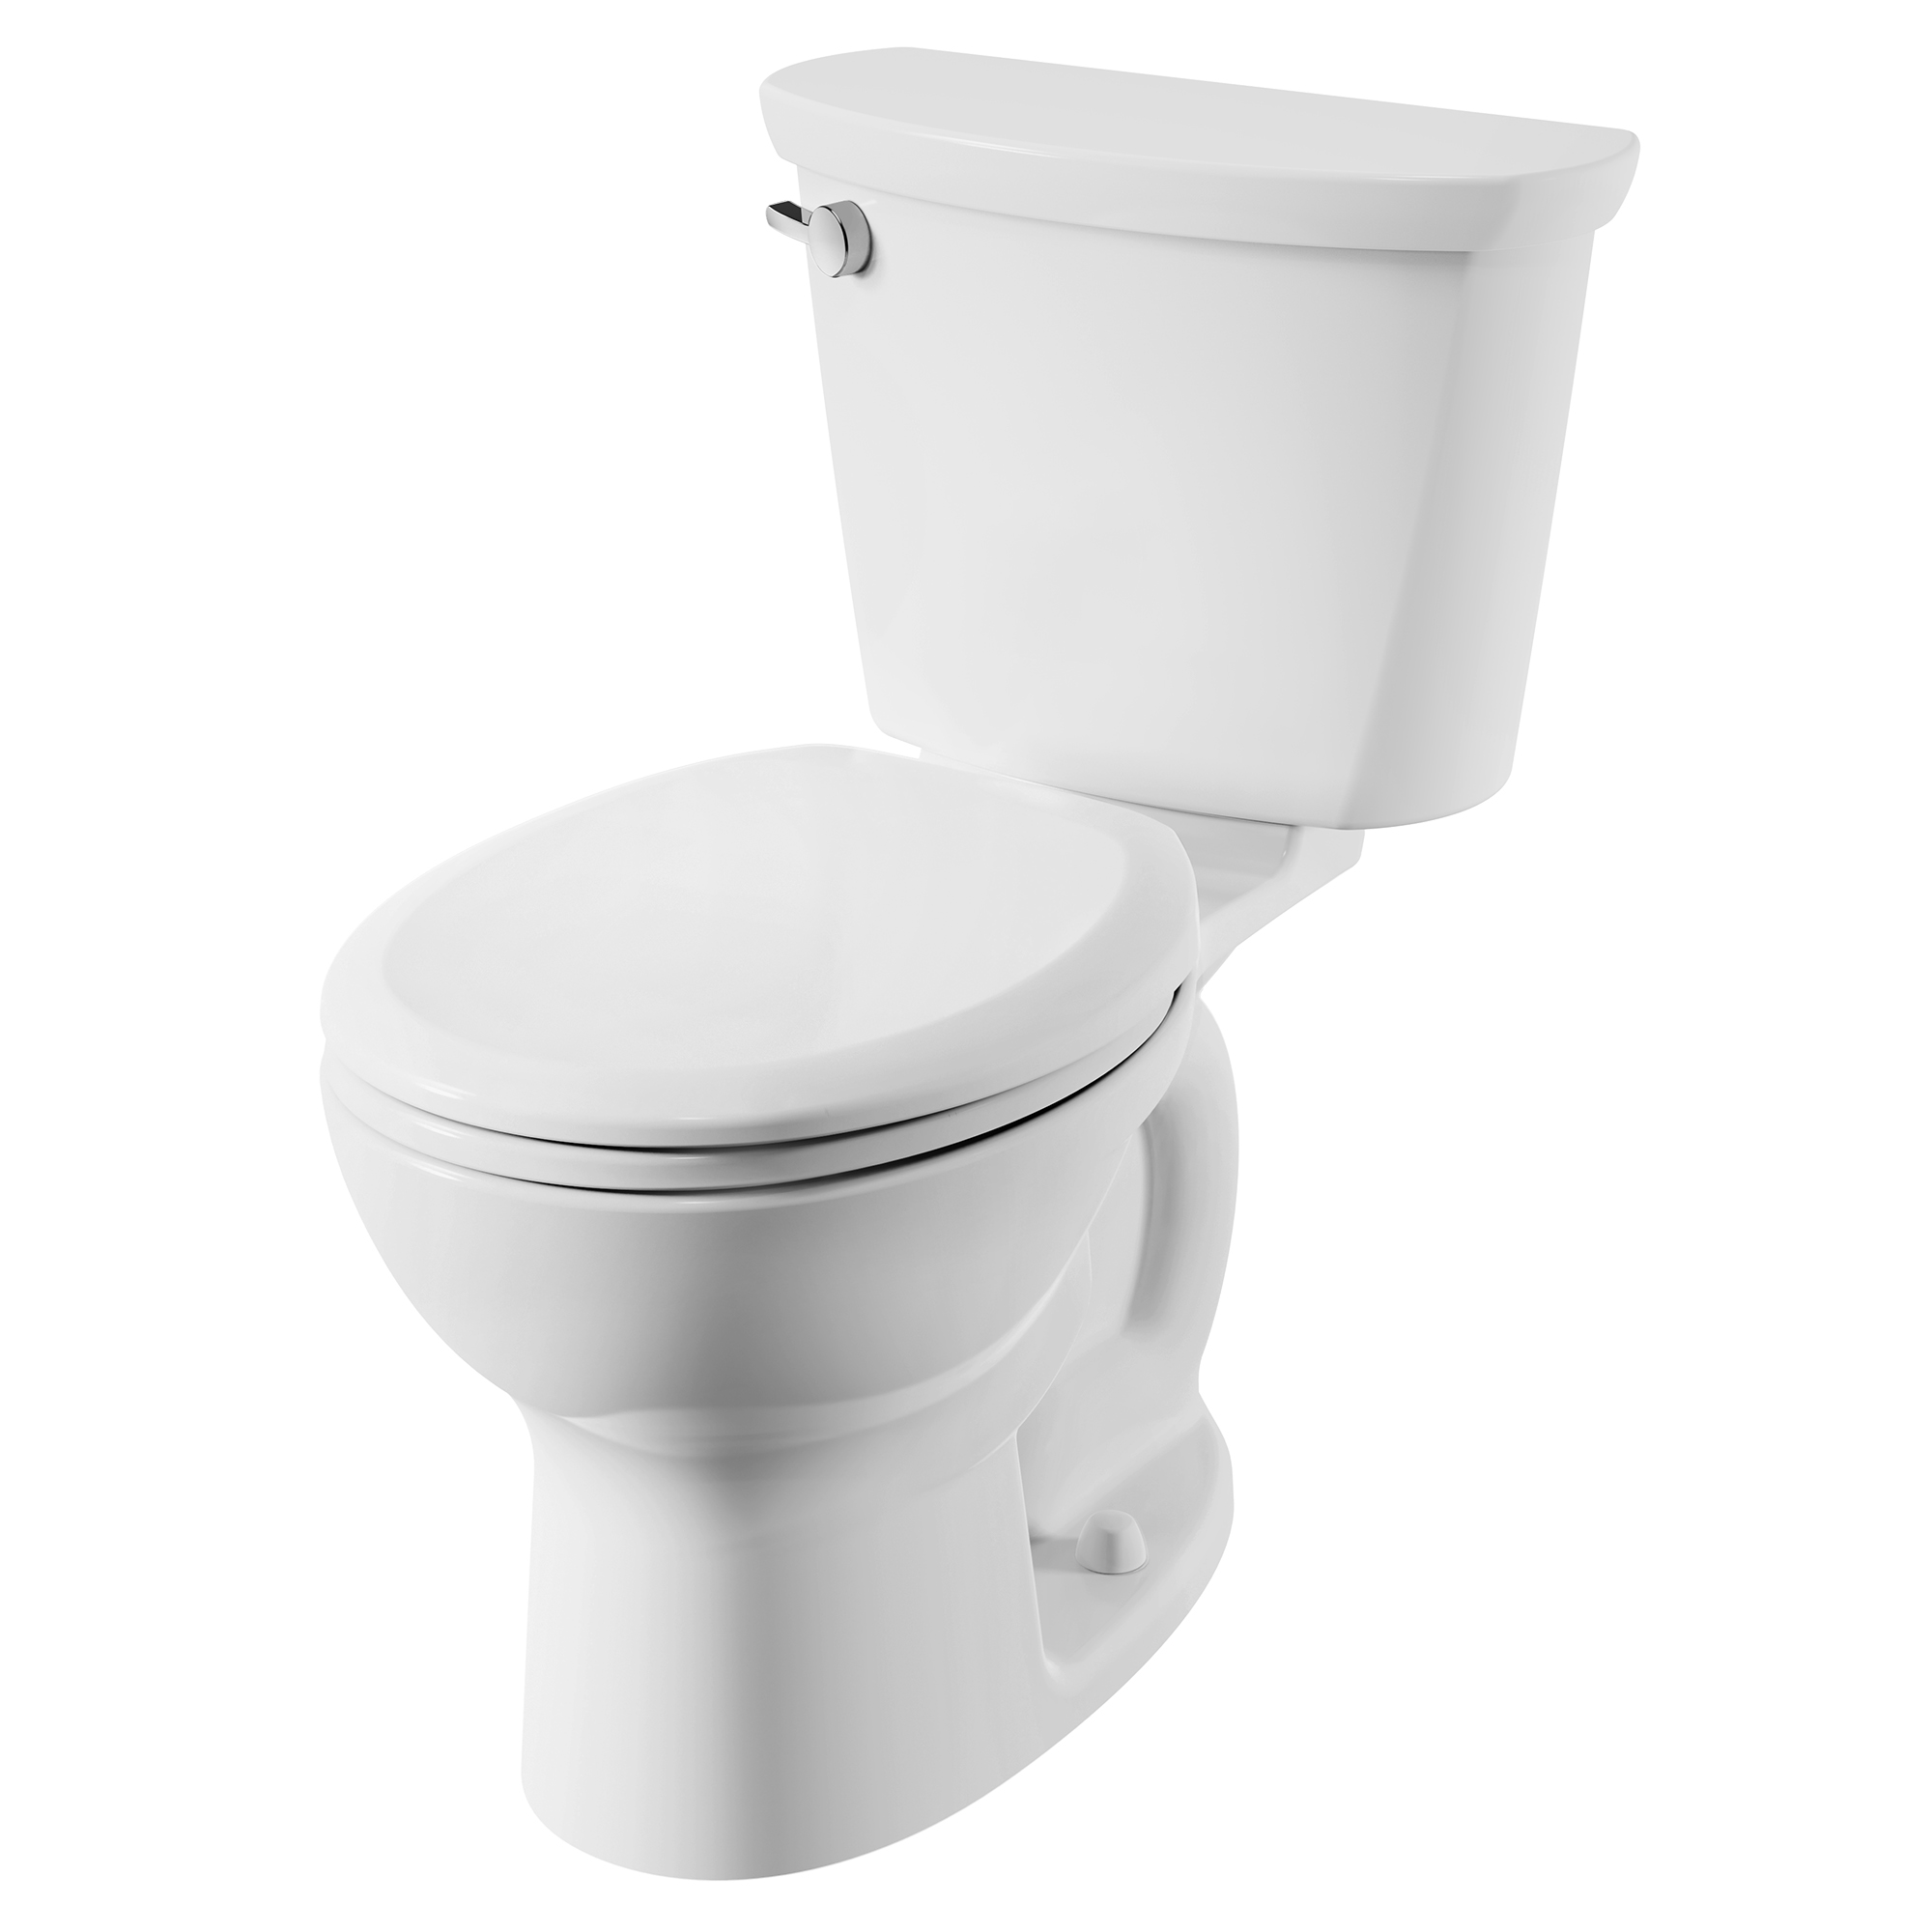 Cadet® PRO Two-Piece 1.6 gpf/6.0 Lpf  Standard Height Round Front 10-Inch Rough Toilet Less Seat